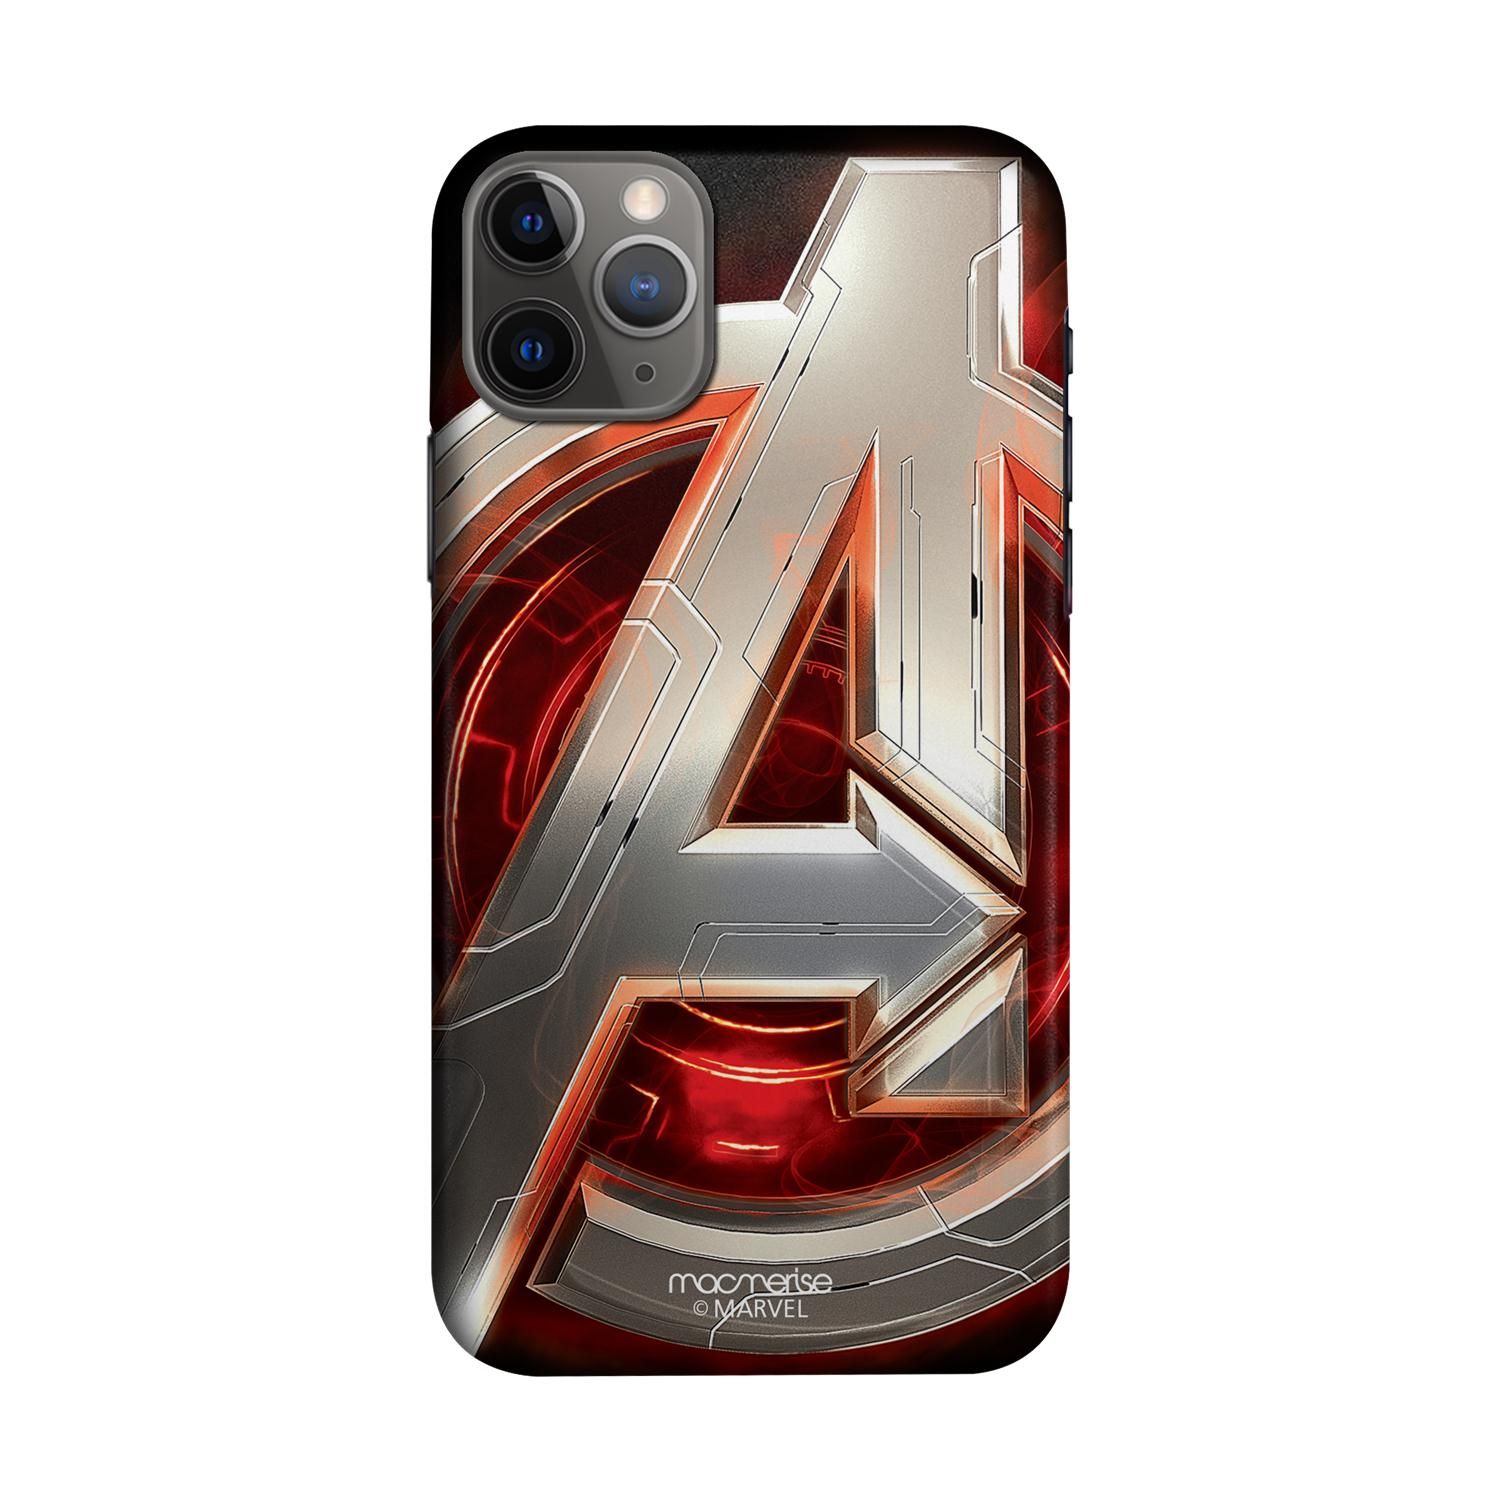 Buy Avengers Version 2 - Sleek Phone Case for iPhone 11 Pro Max Online